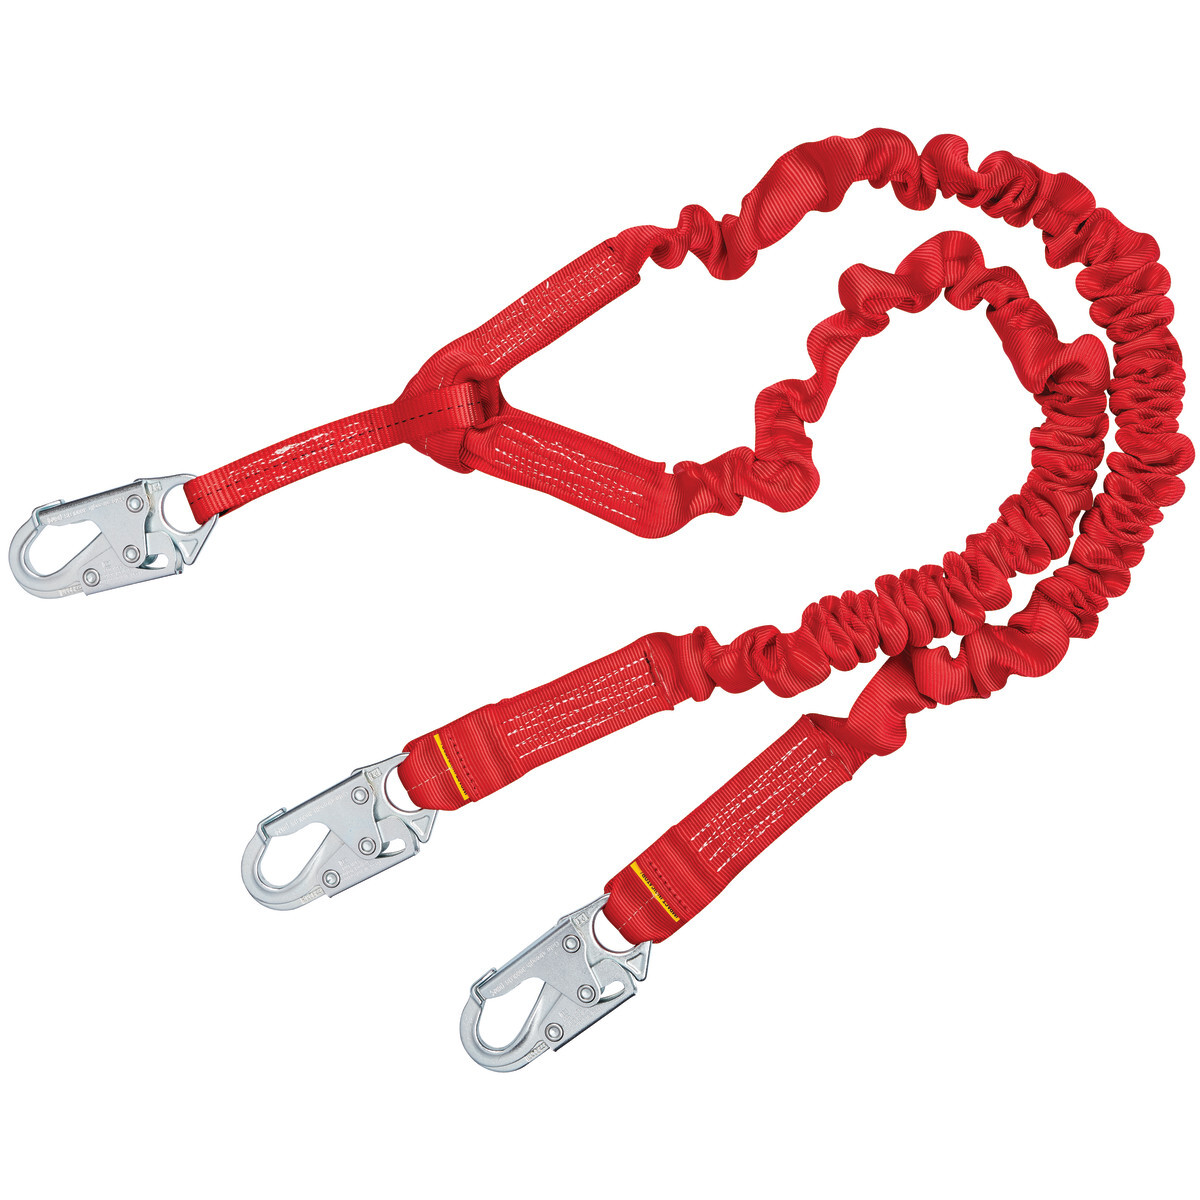 3M™ PROTECTA® PRO™ Stretch 100% Tie-Off Shock Absorbing Lanyard 1340141